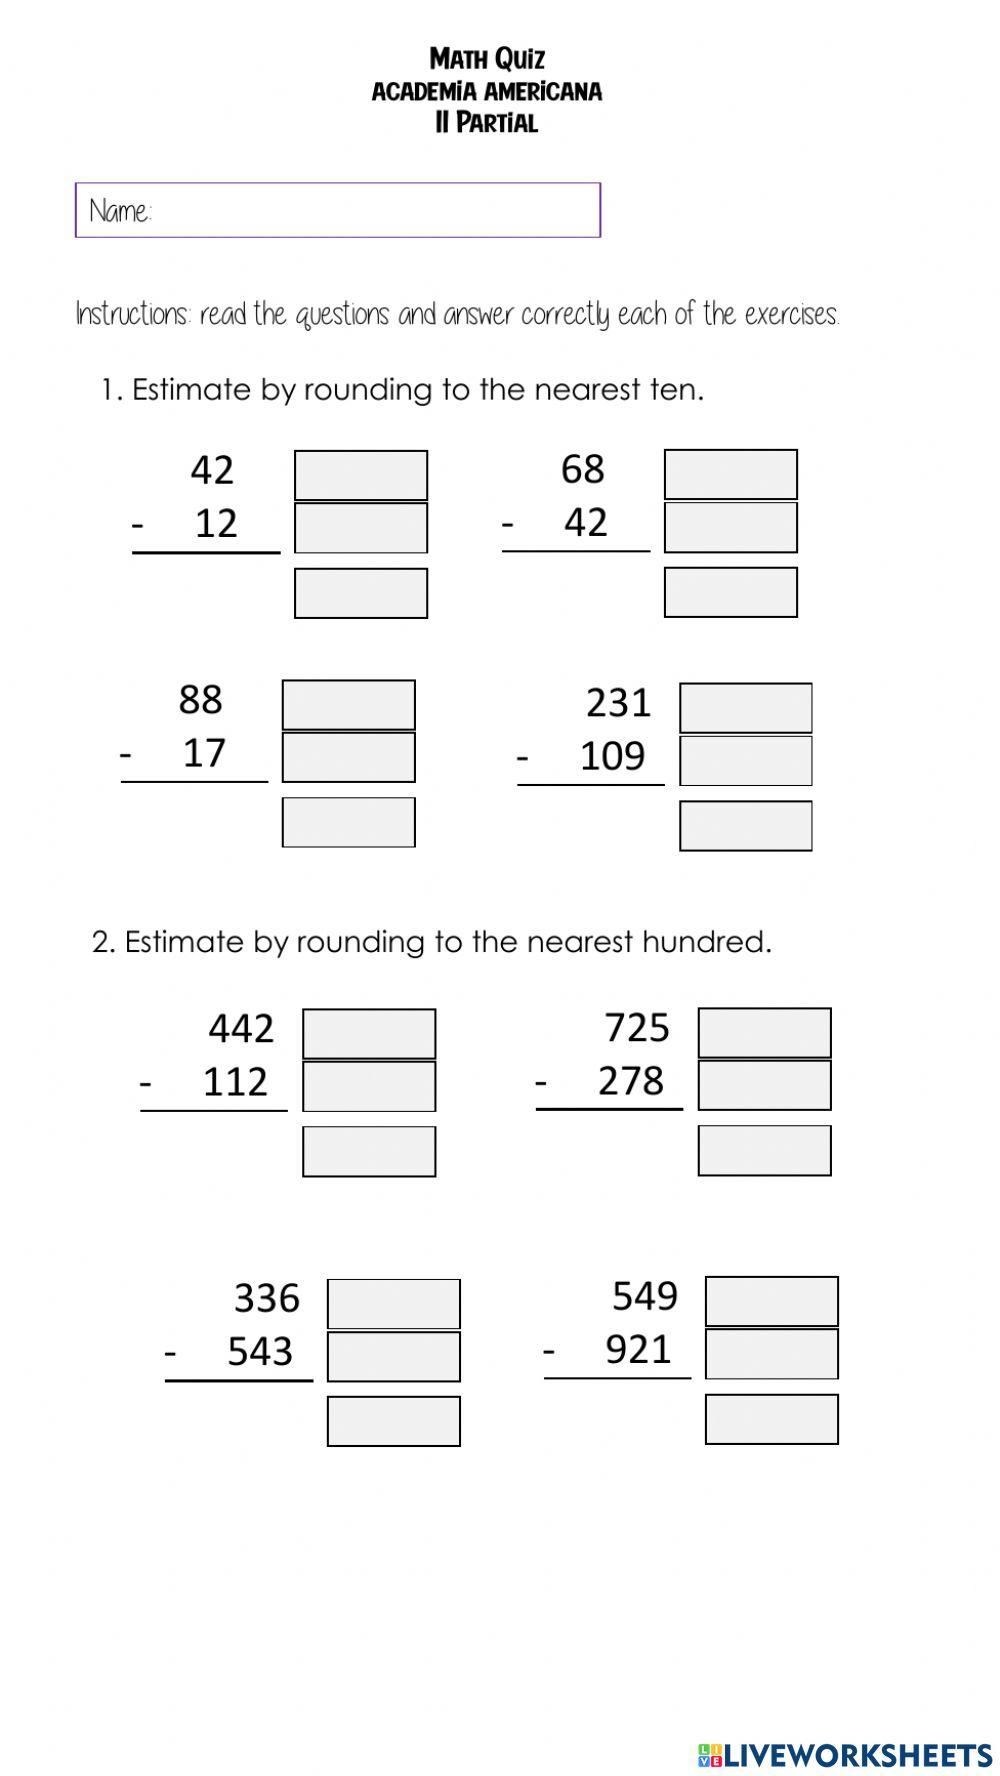 Estimate by rounding